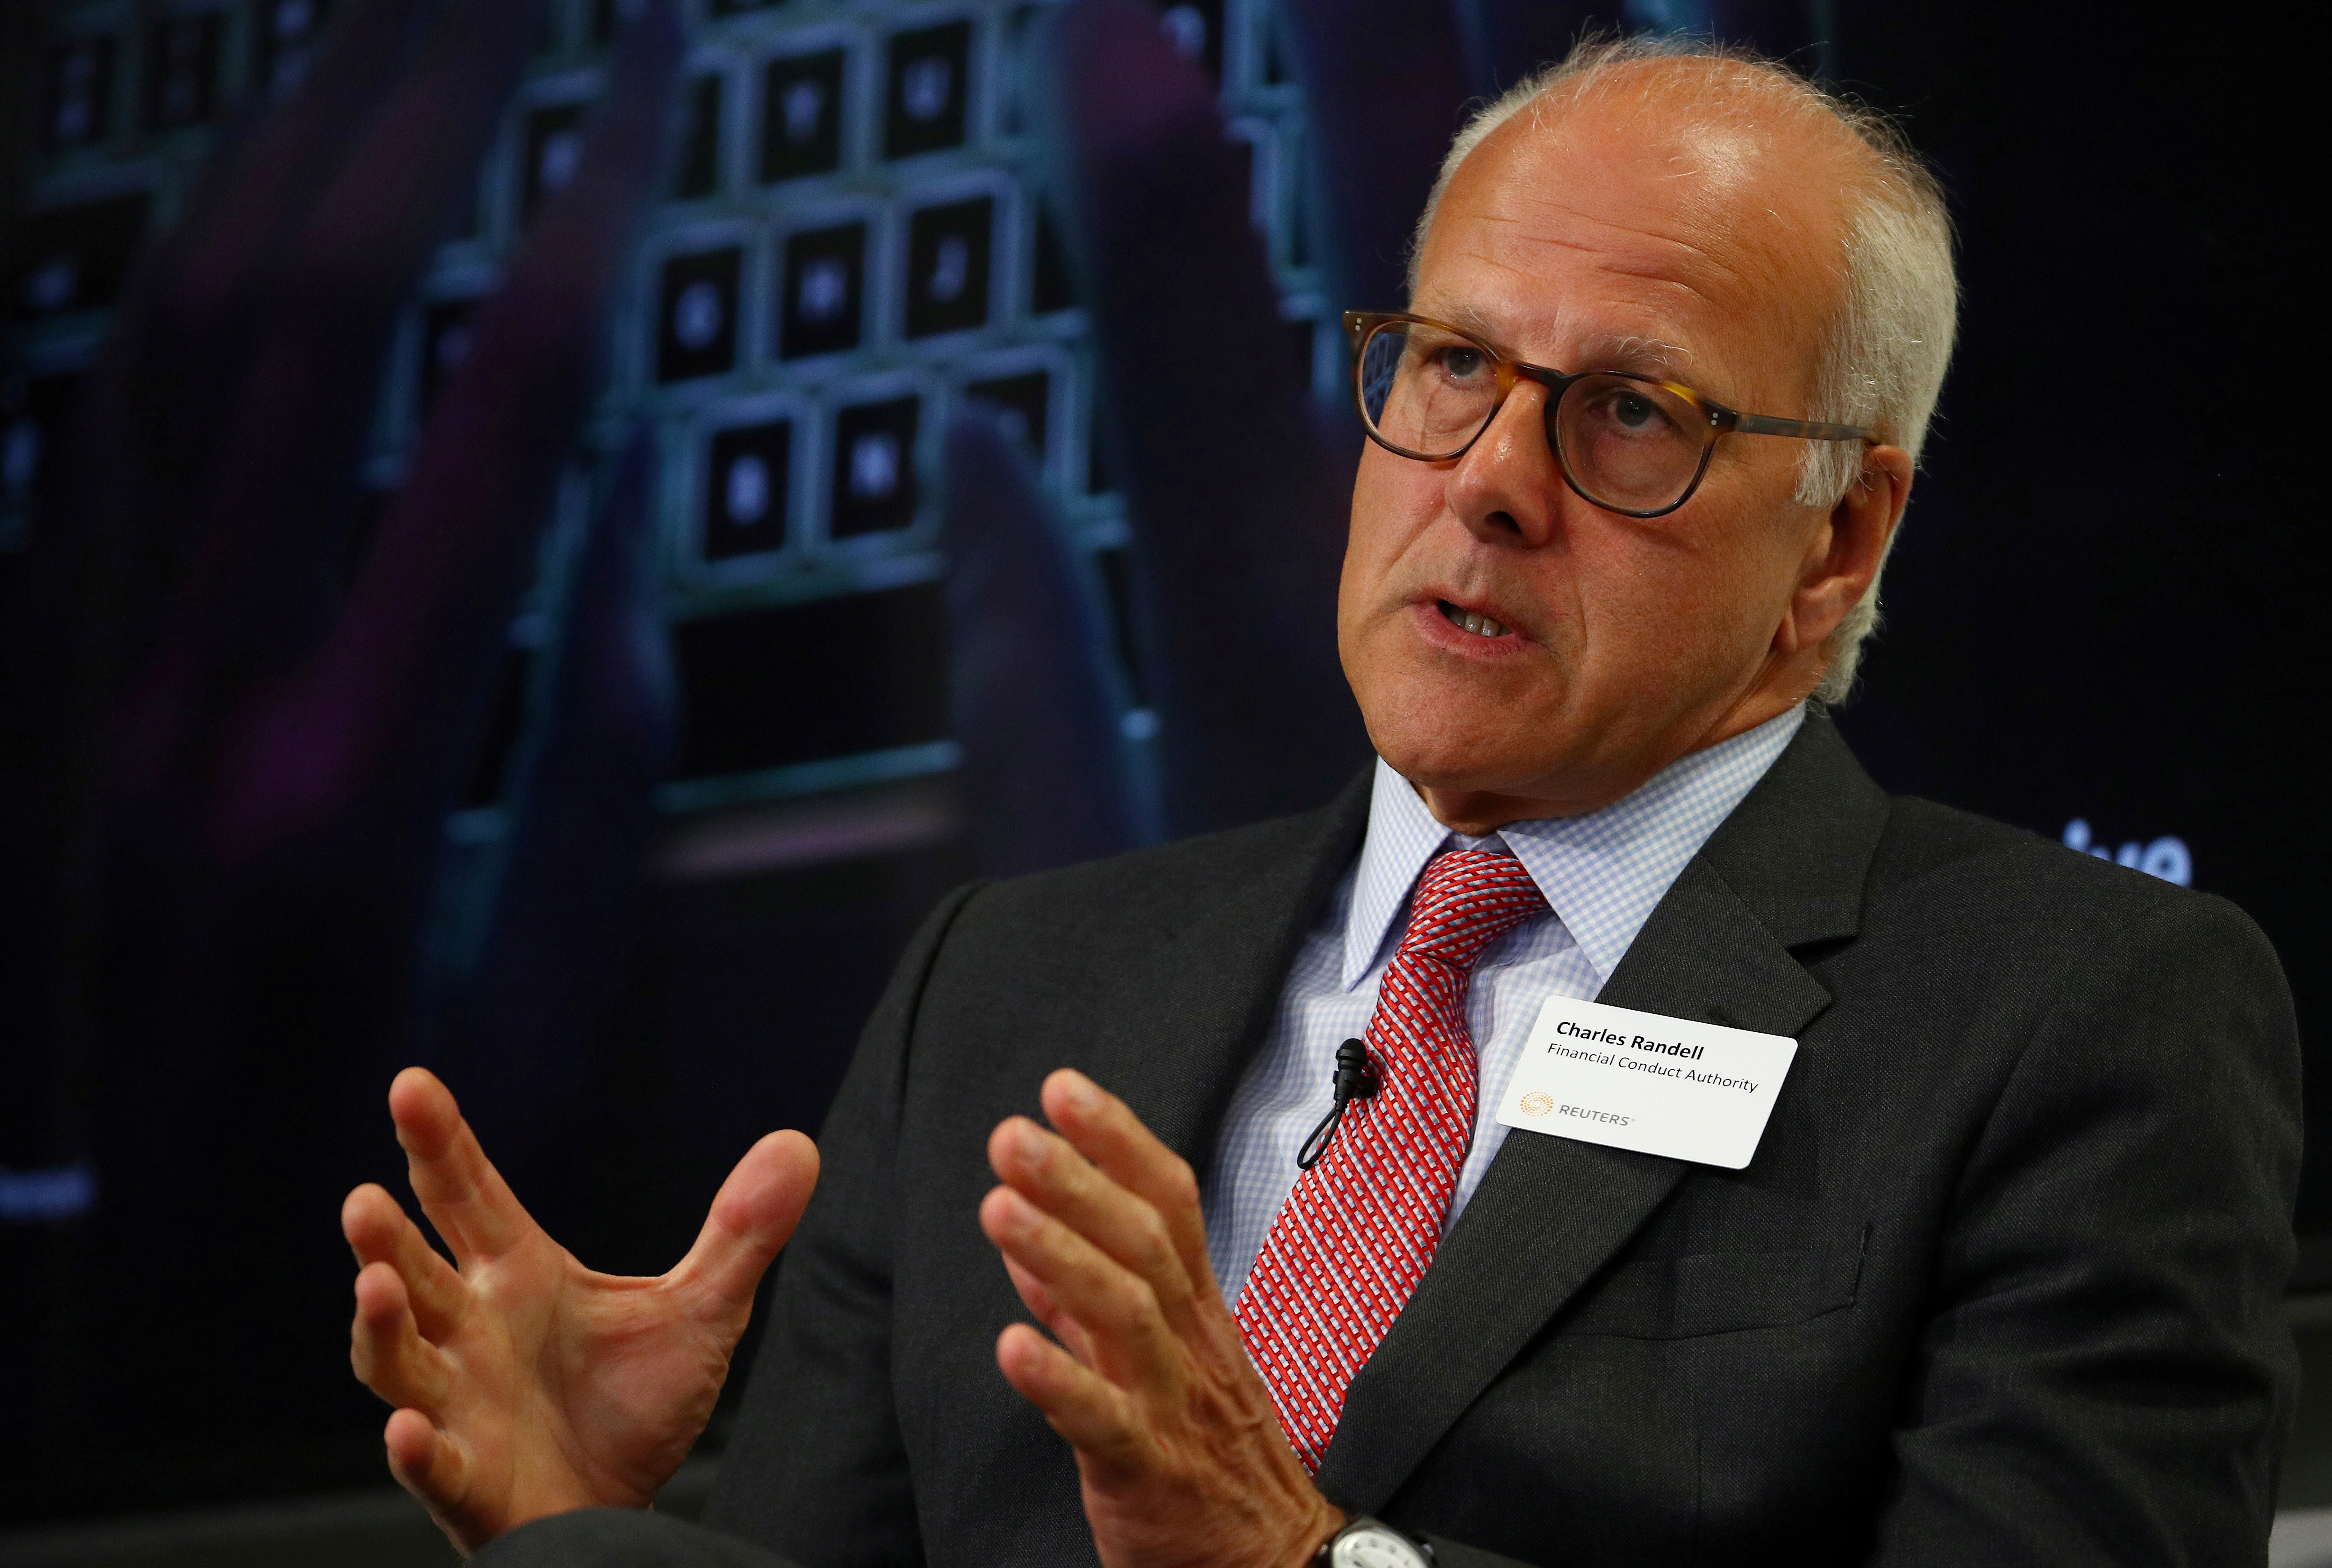 The Chair of the Financial Conduct Authority Charles Randell, speaks at a Reuters Newsmaker event, in London